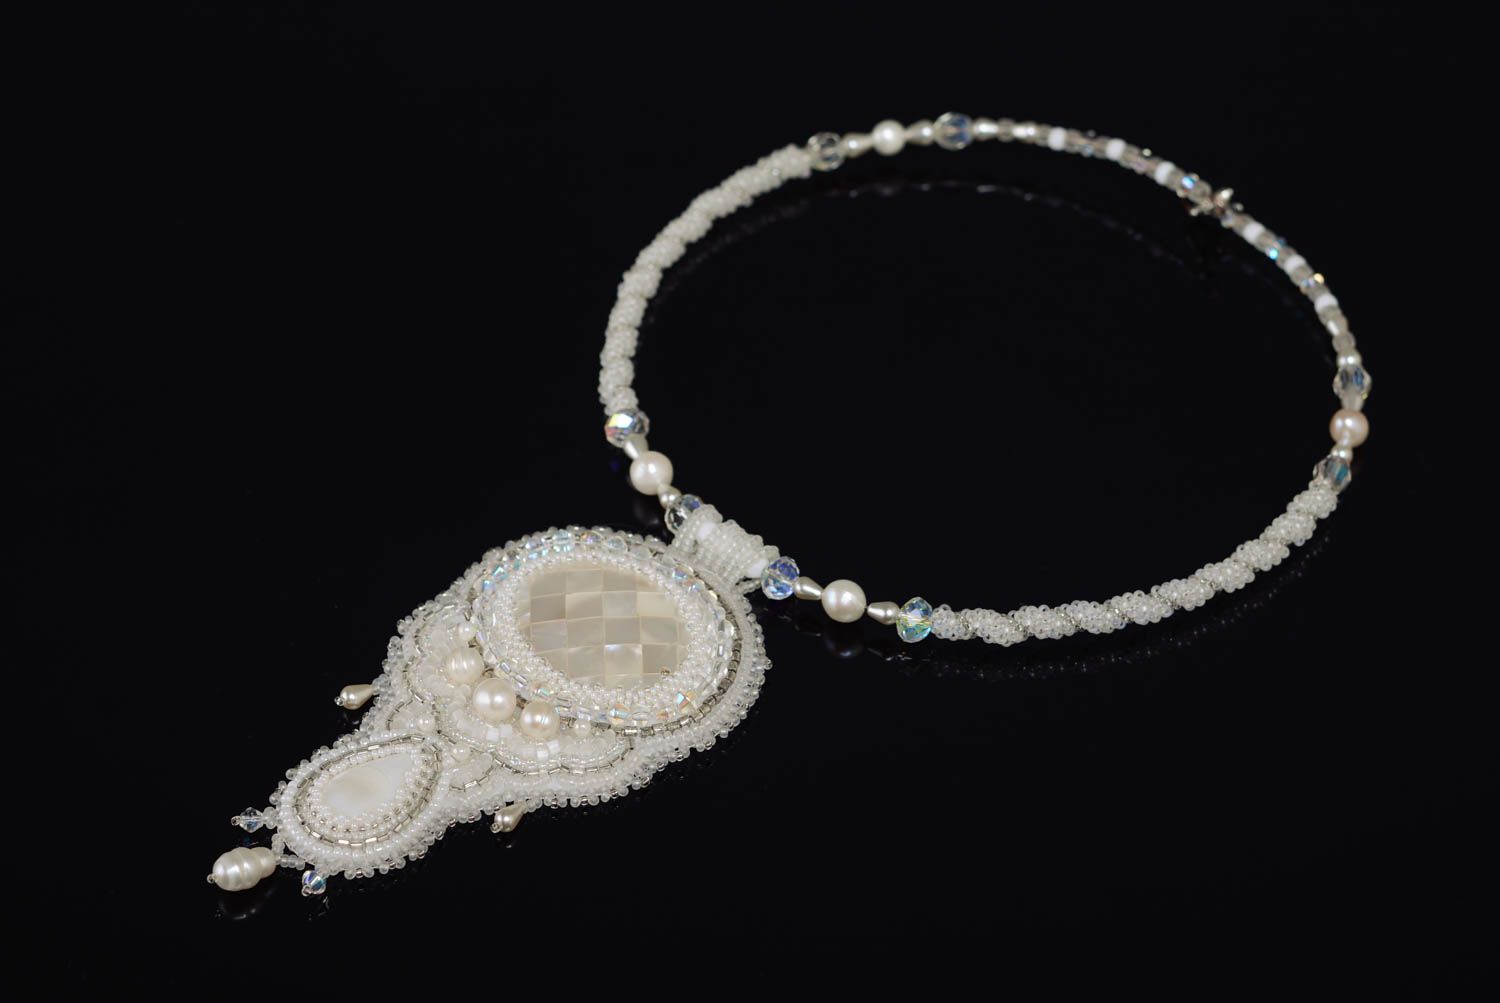 Handmade necklace made of beads and pearls elegant beautiful delicate white jewelry photo 1